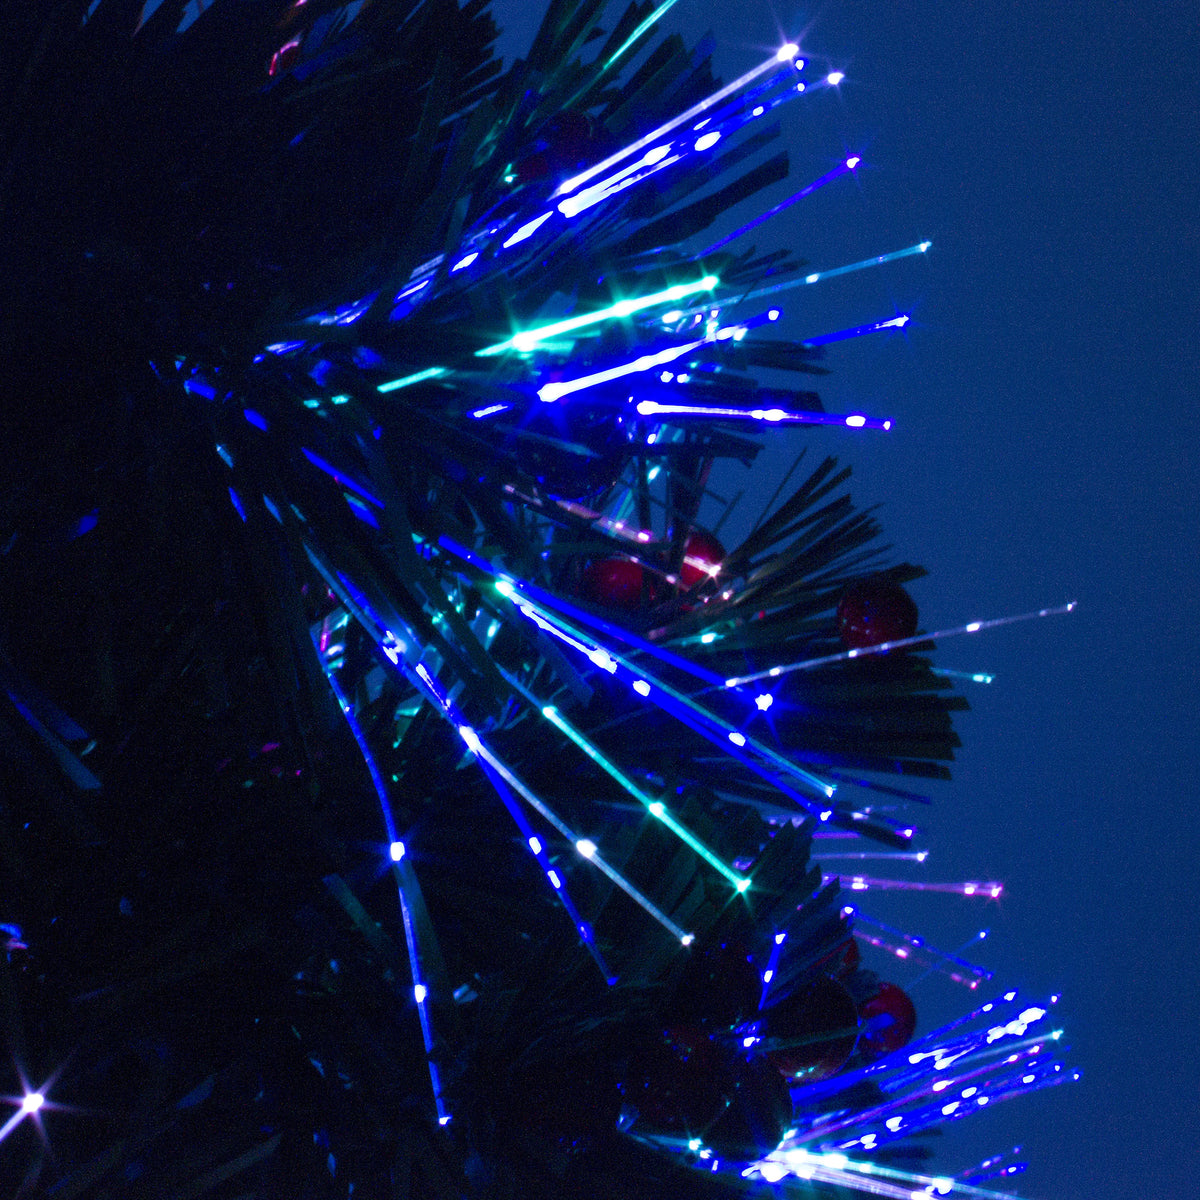 Green Fibre Optic Christmas Tree 2ft to 6ft with Red Berries and Multi Coloured Lights